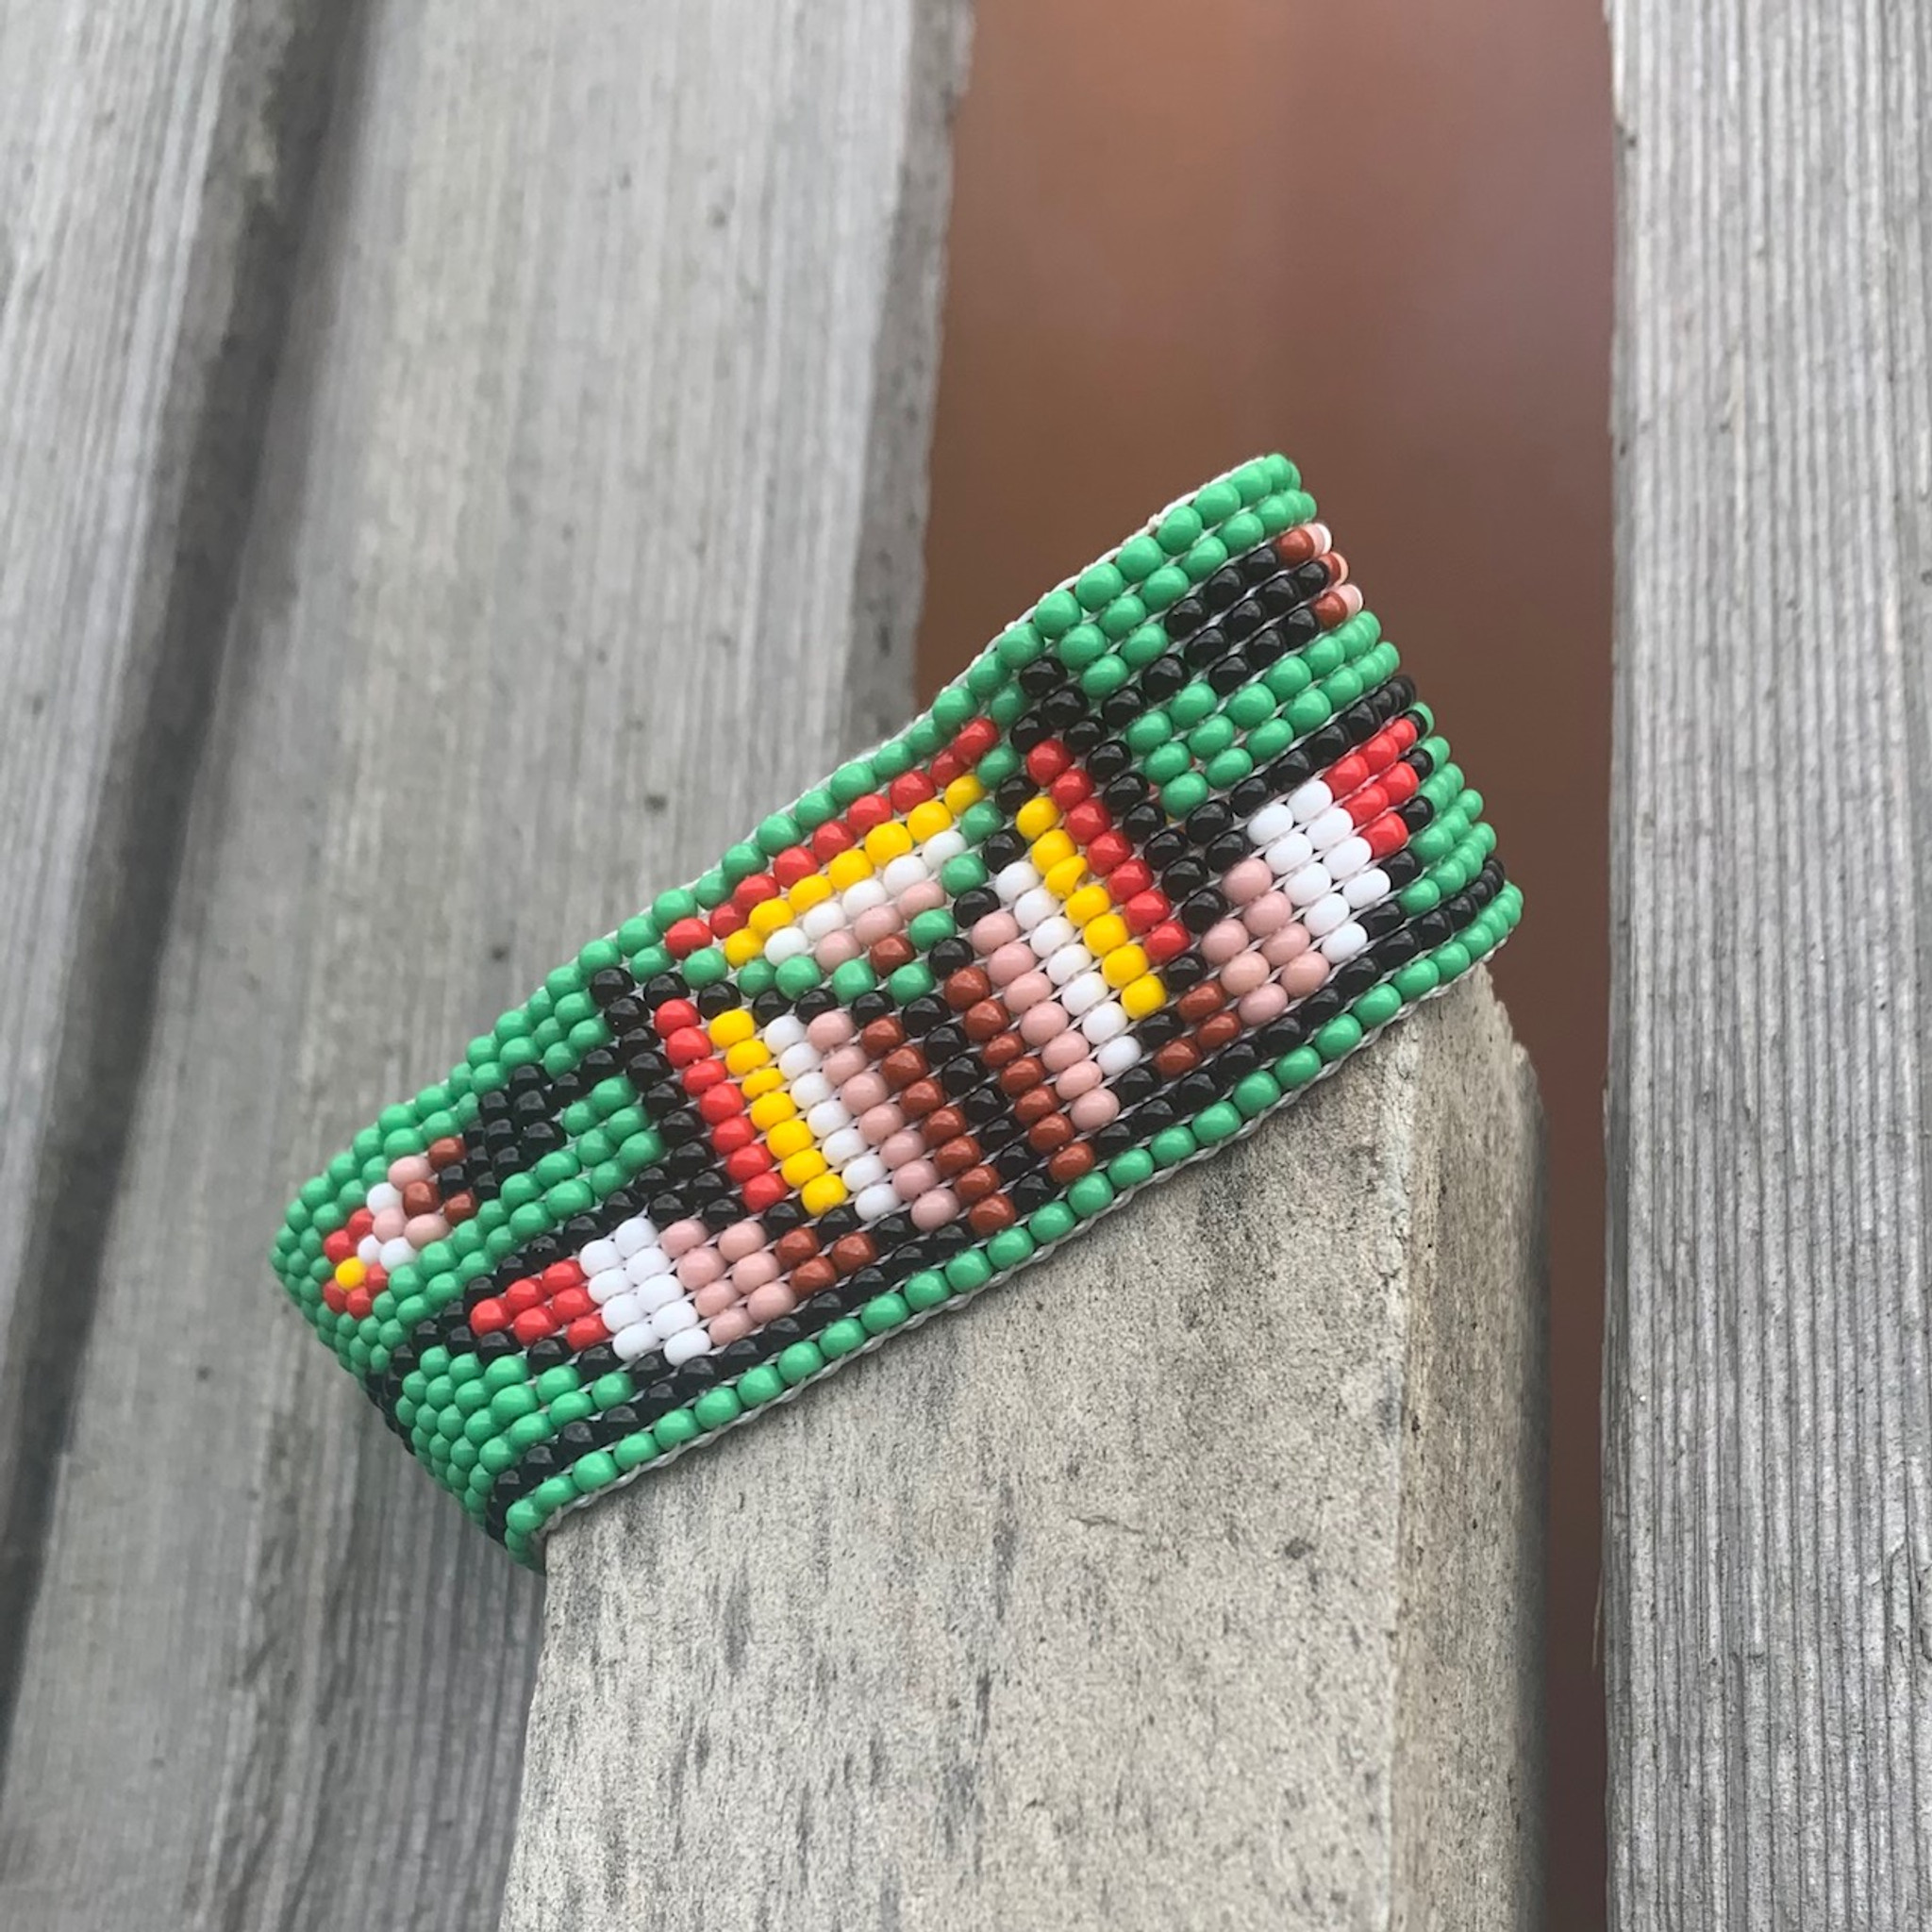 Amazon.com: Beaded Bracelet Set for Women Teens and Girls, Boho Adjustable  String Thin Colorful Beads Bracelets, Bohemian Hippie Indian Native  American Style, Handmade Jewelry By Tribes : Handmade Products